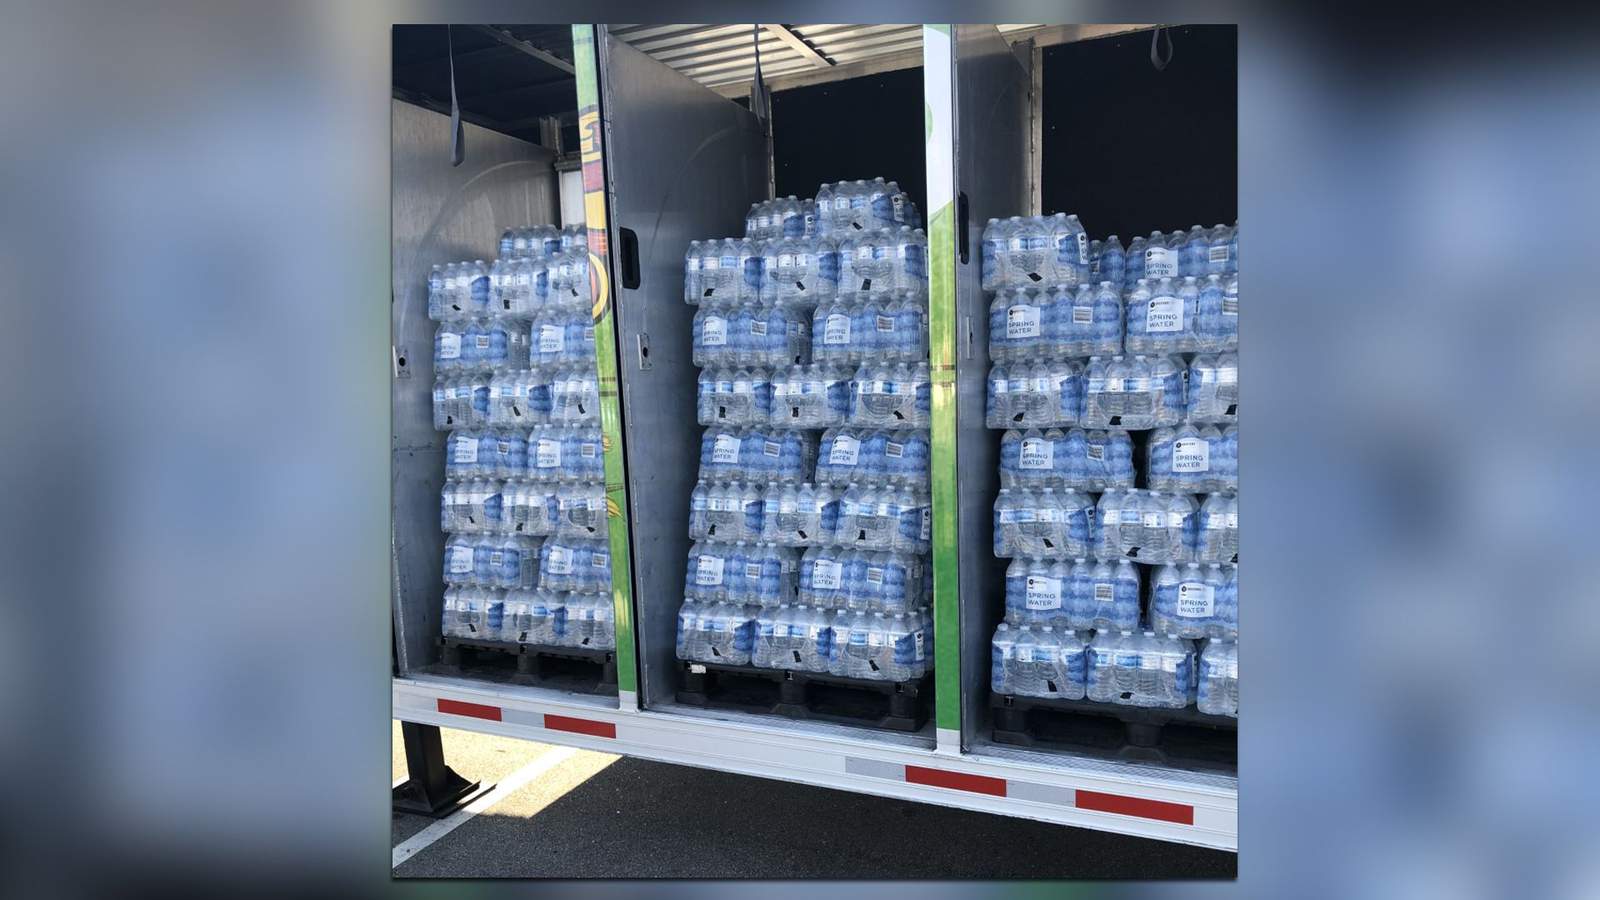 Positively Jax: Local company collects water for Texas after winter disaster